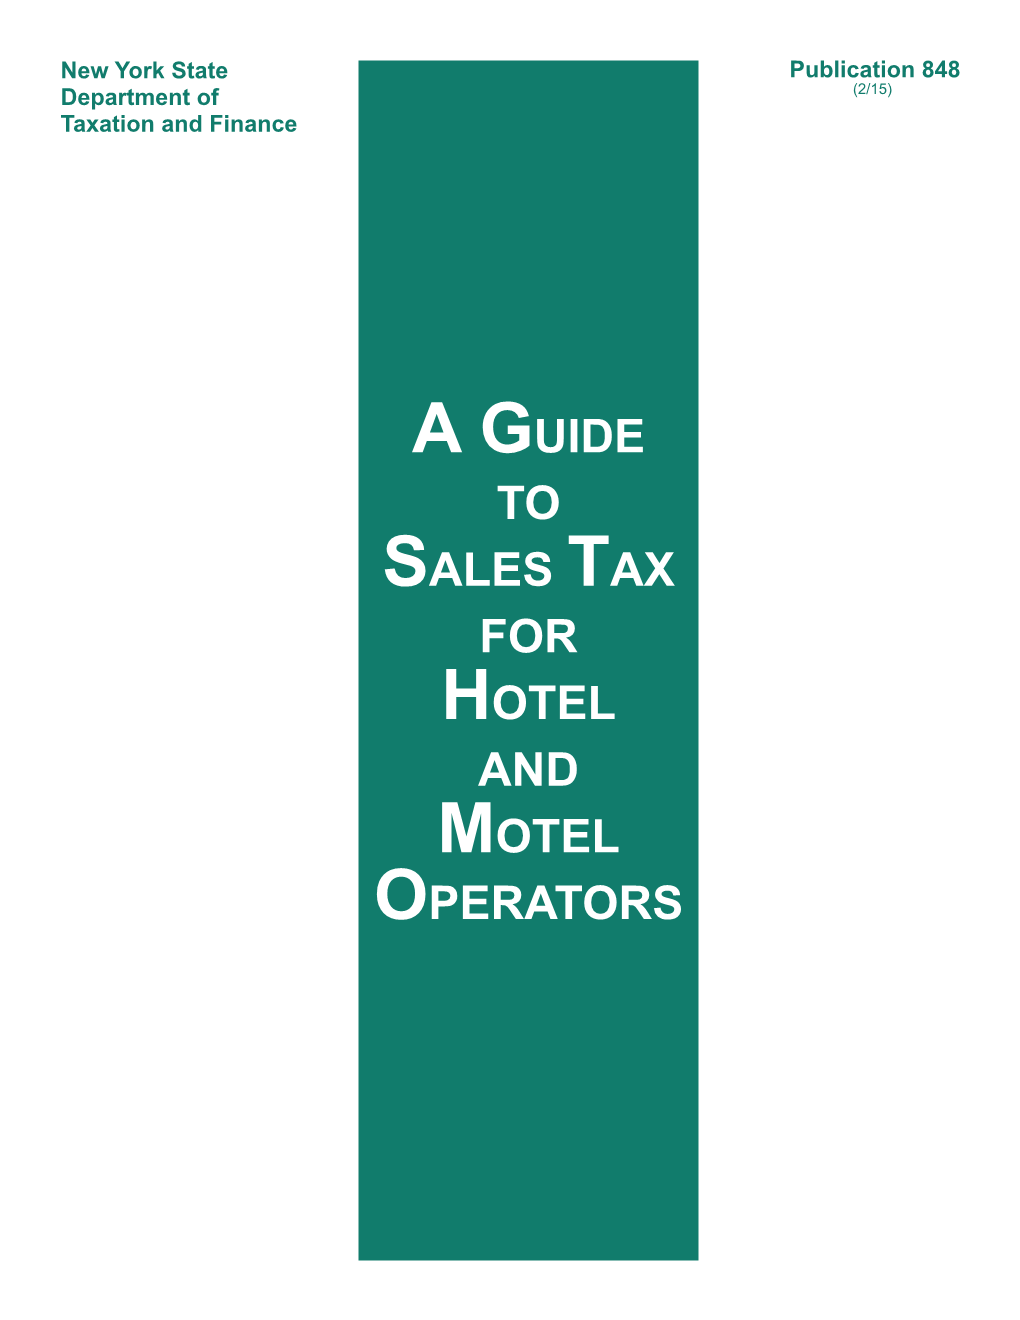 A GUIDE to SALES TAX for HOTEL and MOTEL OPERATORS Publication 848 (2/15)